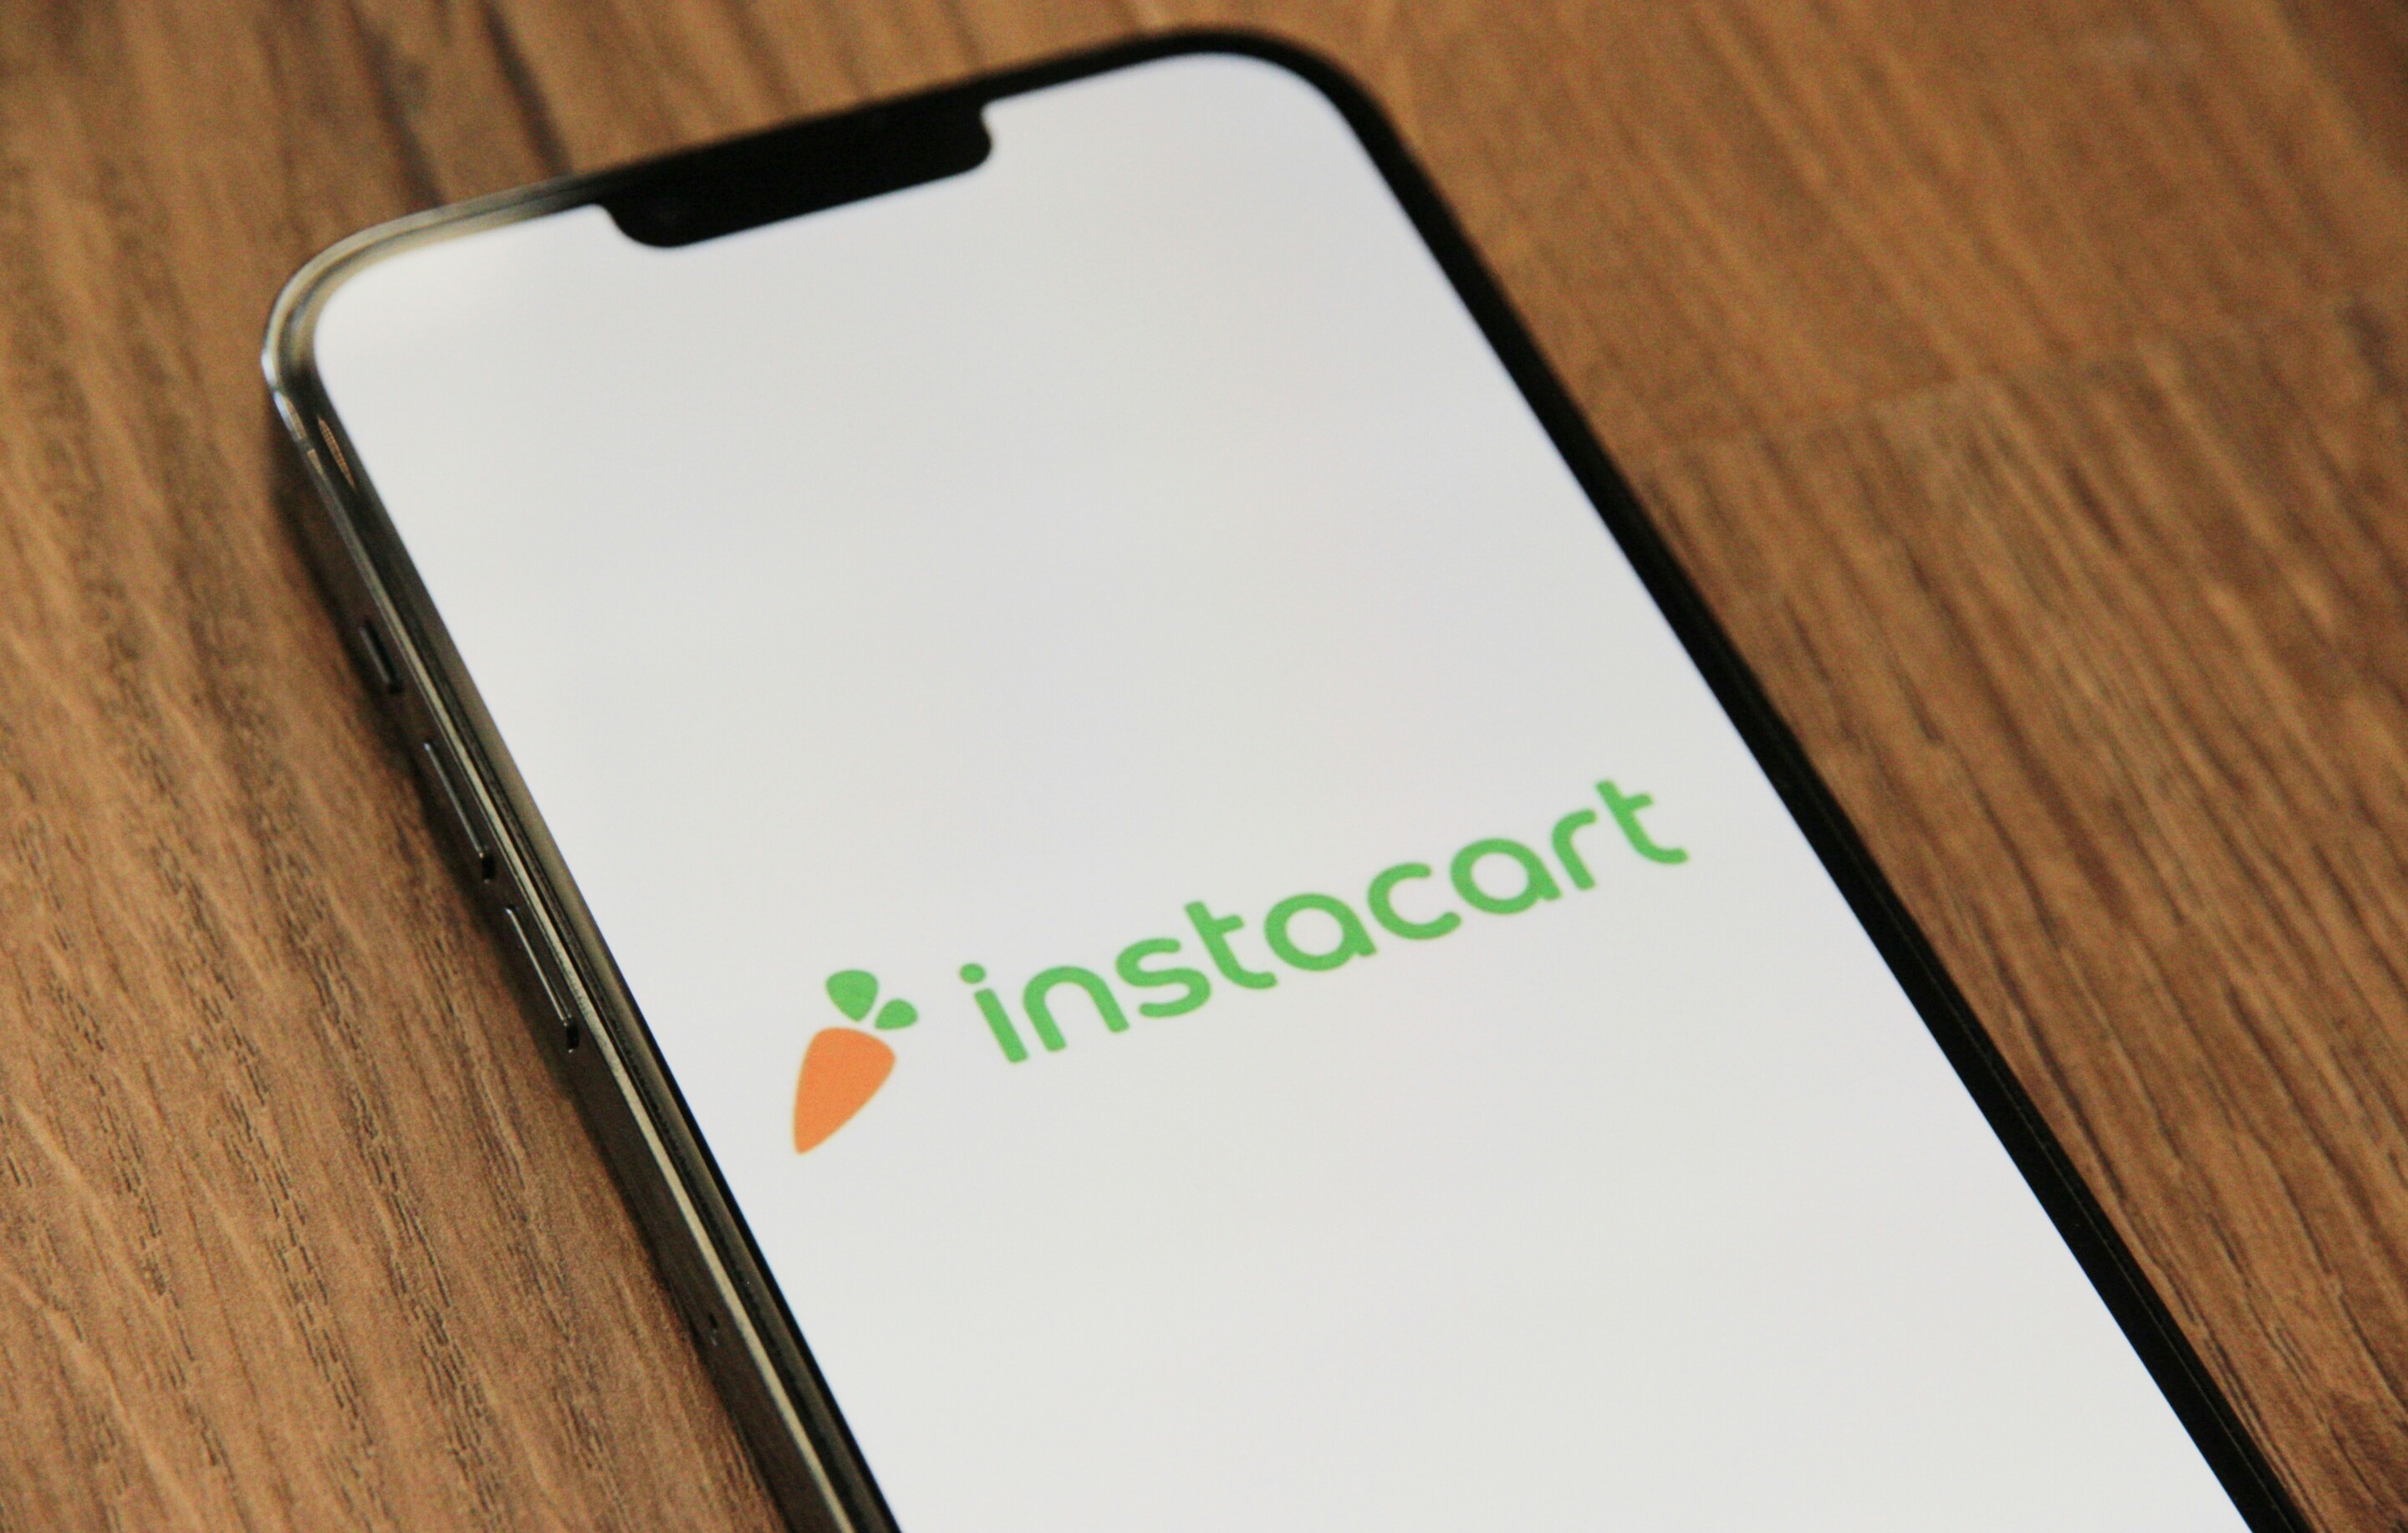 Instacart Receives Approval for Alcohol Delivery to New Jersey Residences